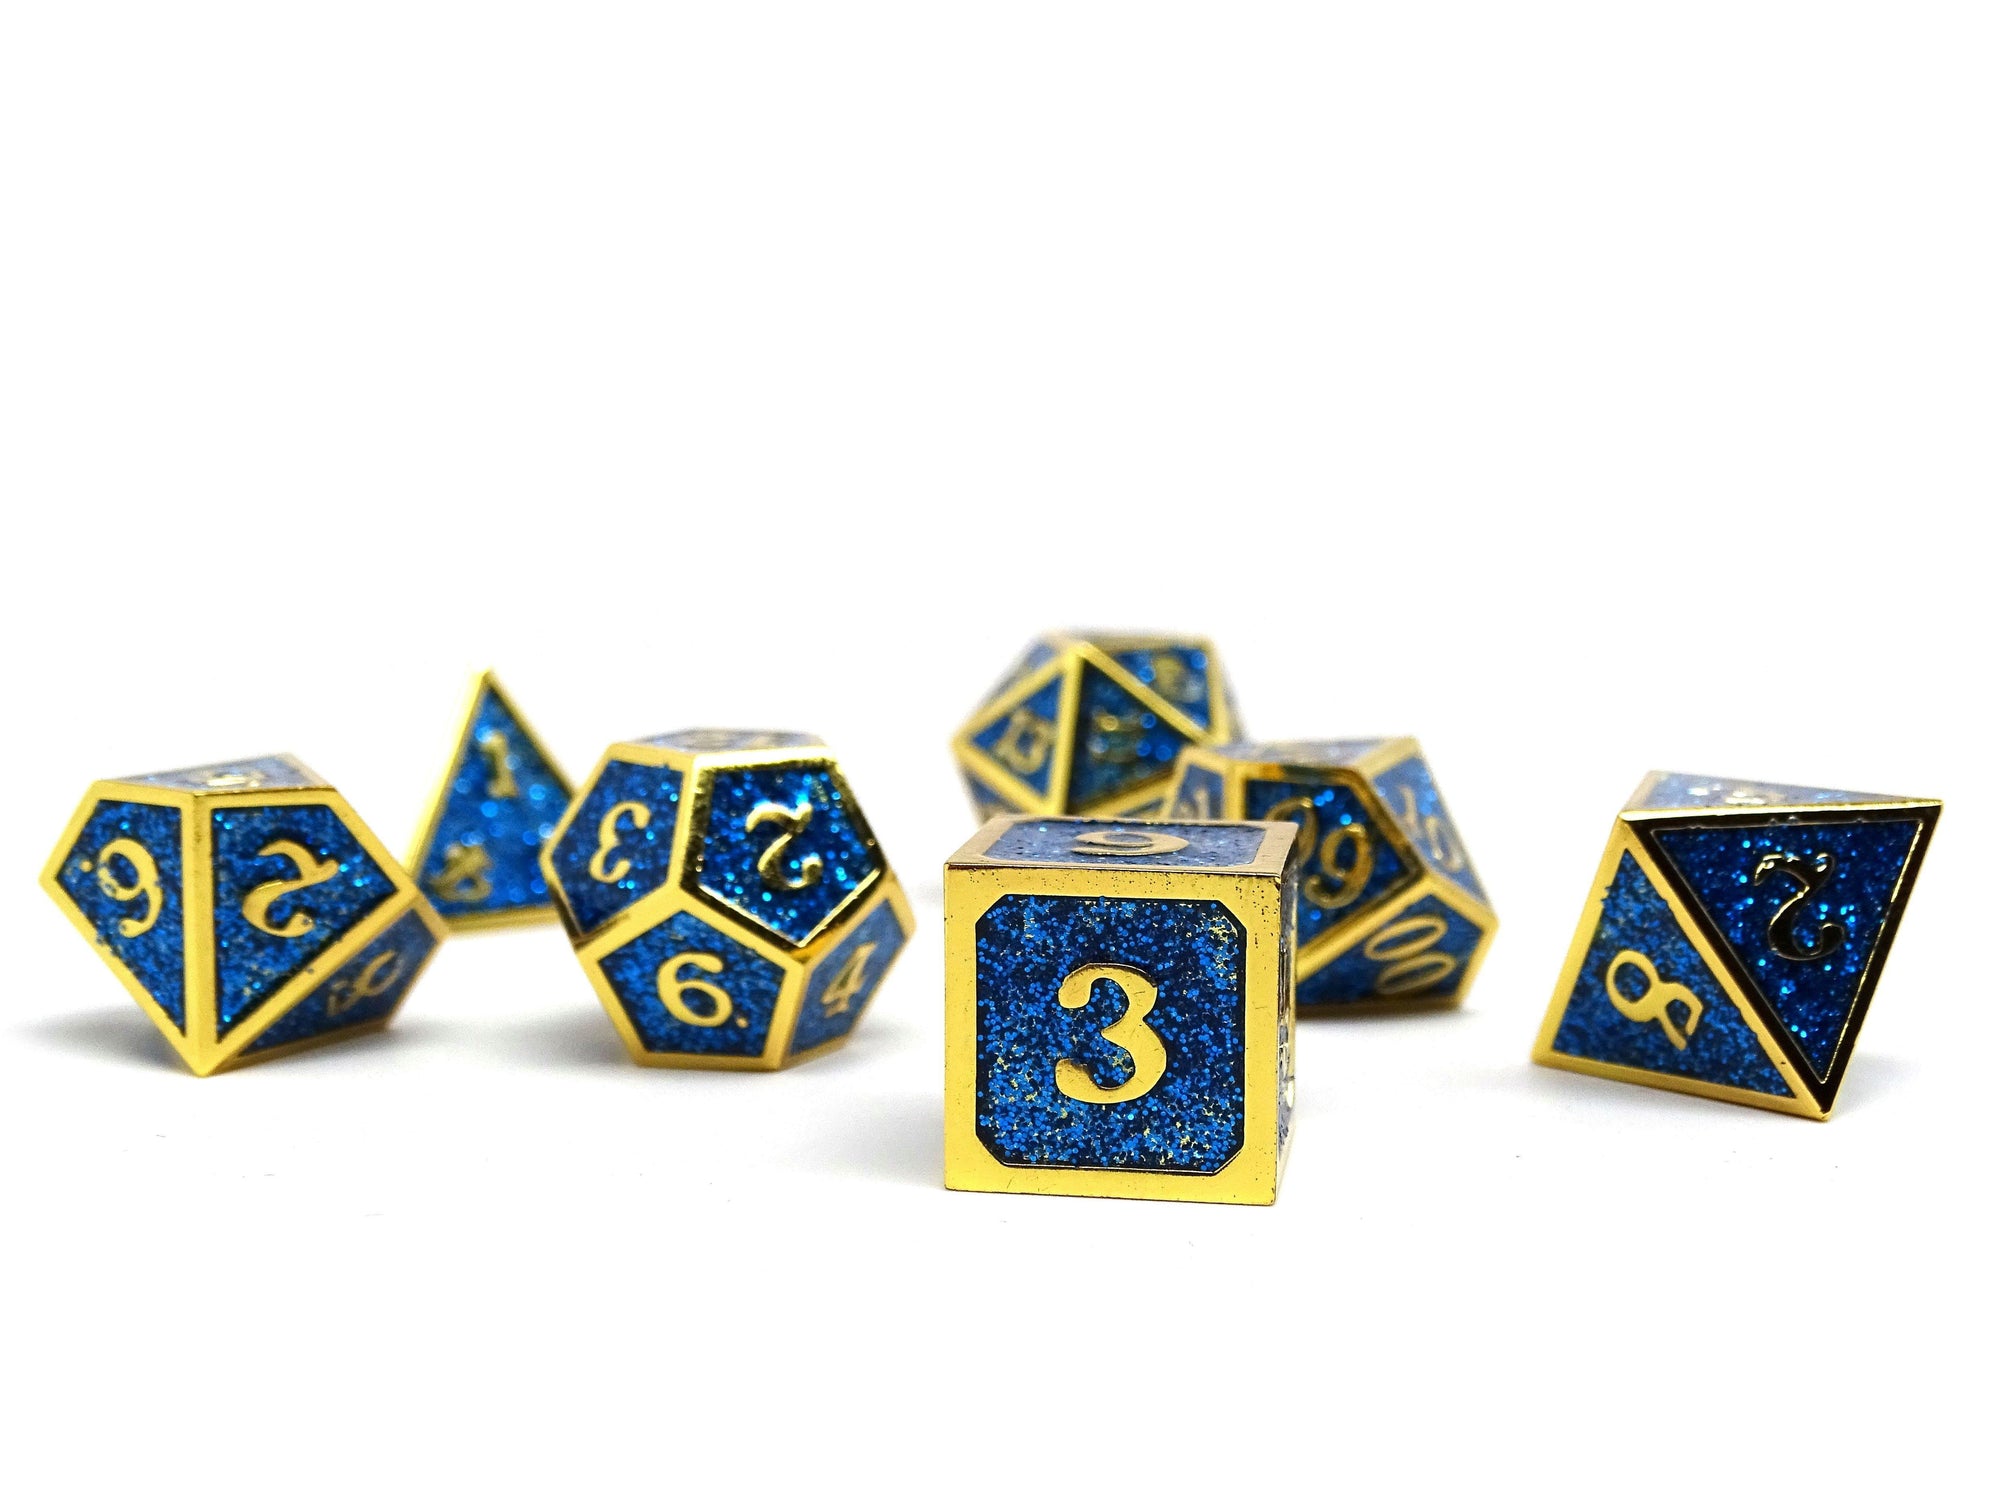 Heroic Dice of Metallic Luster - Blue with Gold Font